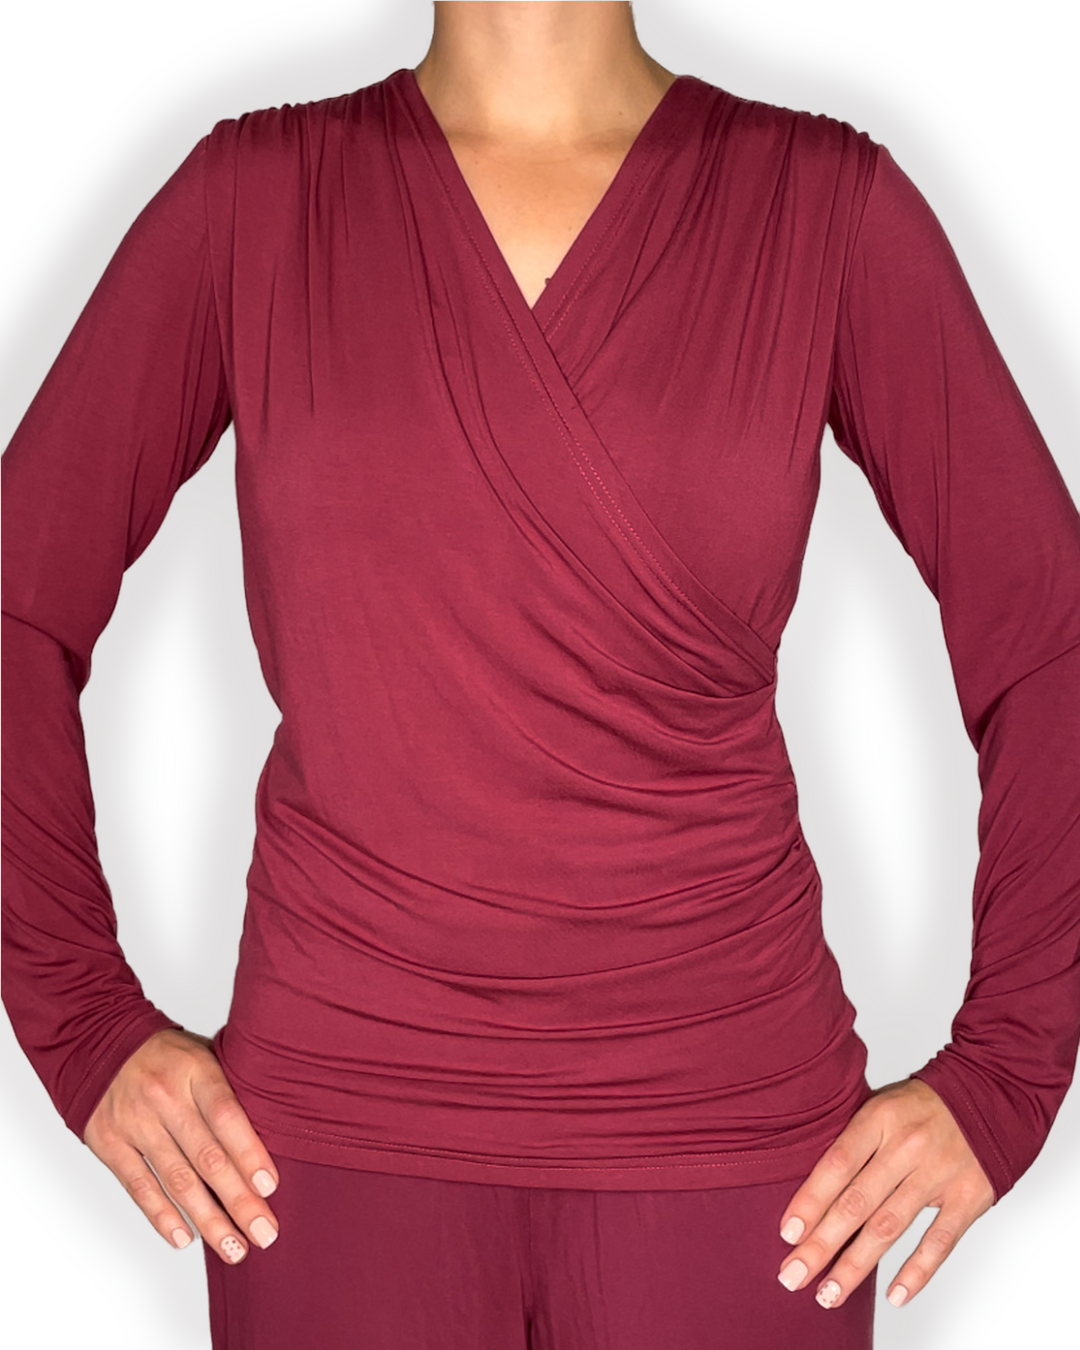 jia and kate ROSIE Braless Bamboo Wrap Top Long Sleeve in berry red color front view